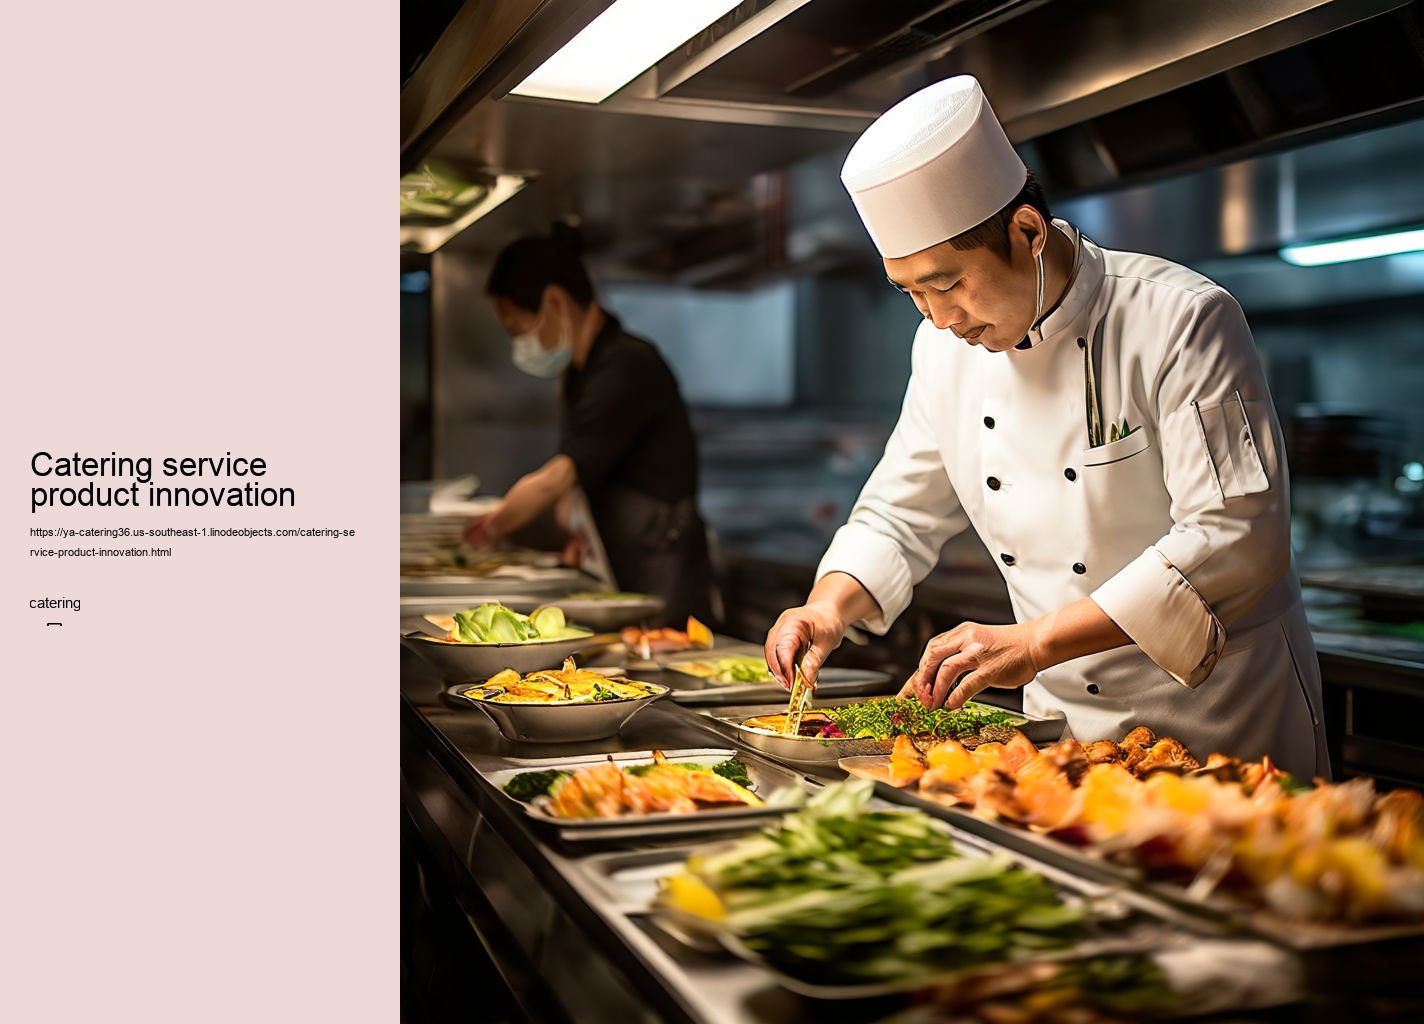 Catering service product innovation